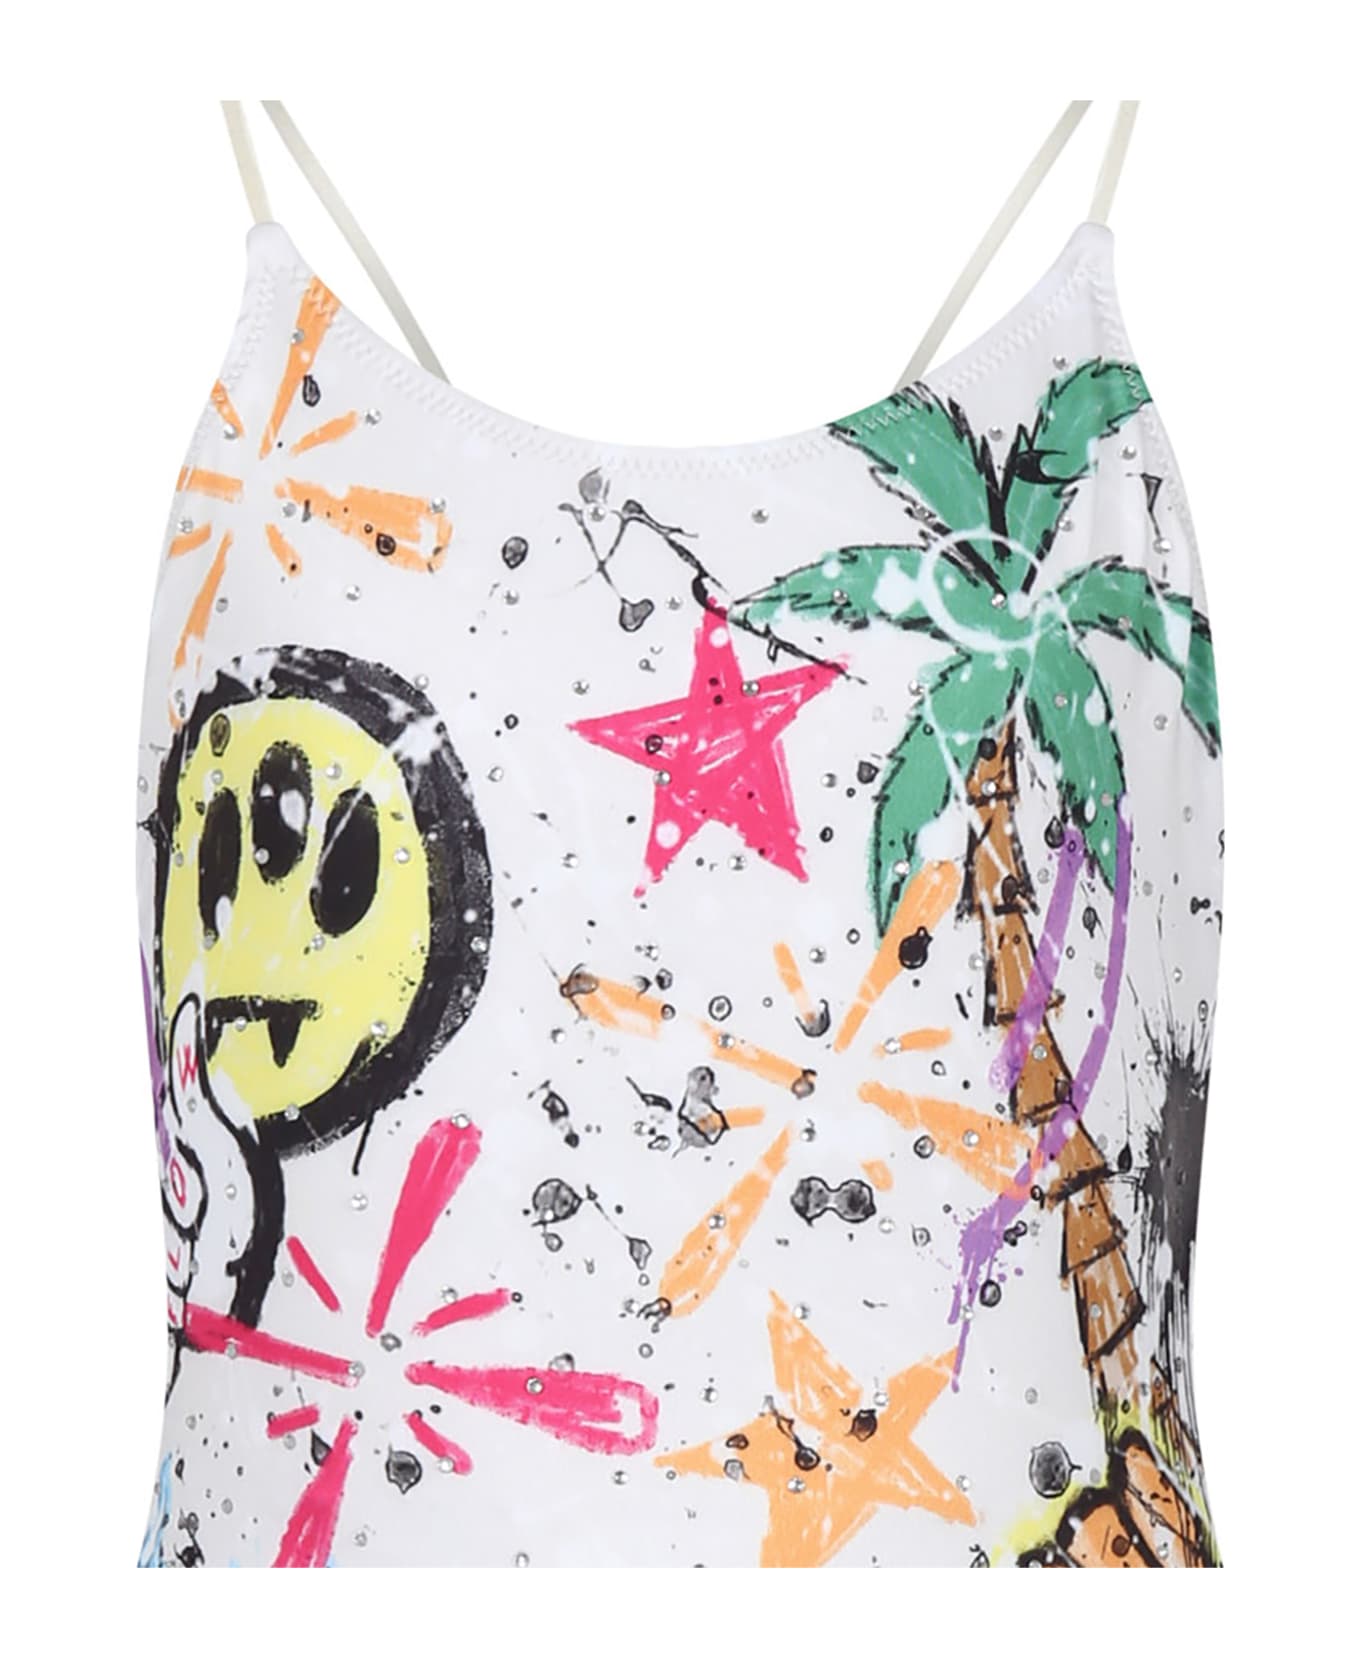 Barrow Ivory Swimsuit For Girl With Palm Tree And Smile Print - Ivory